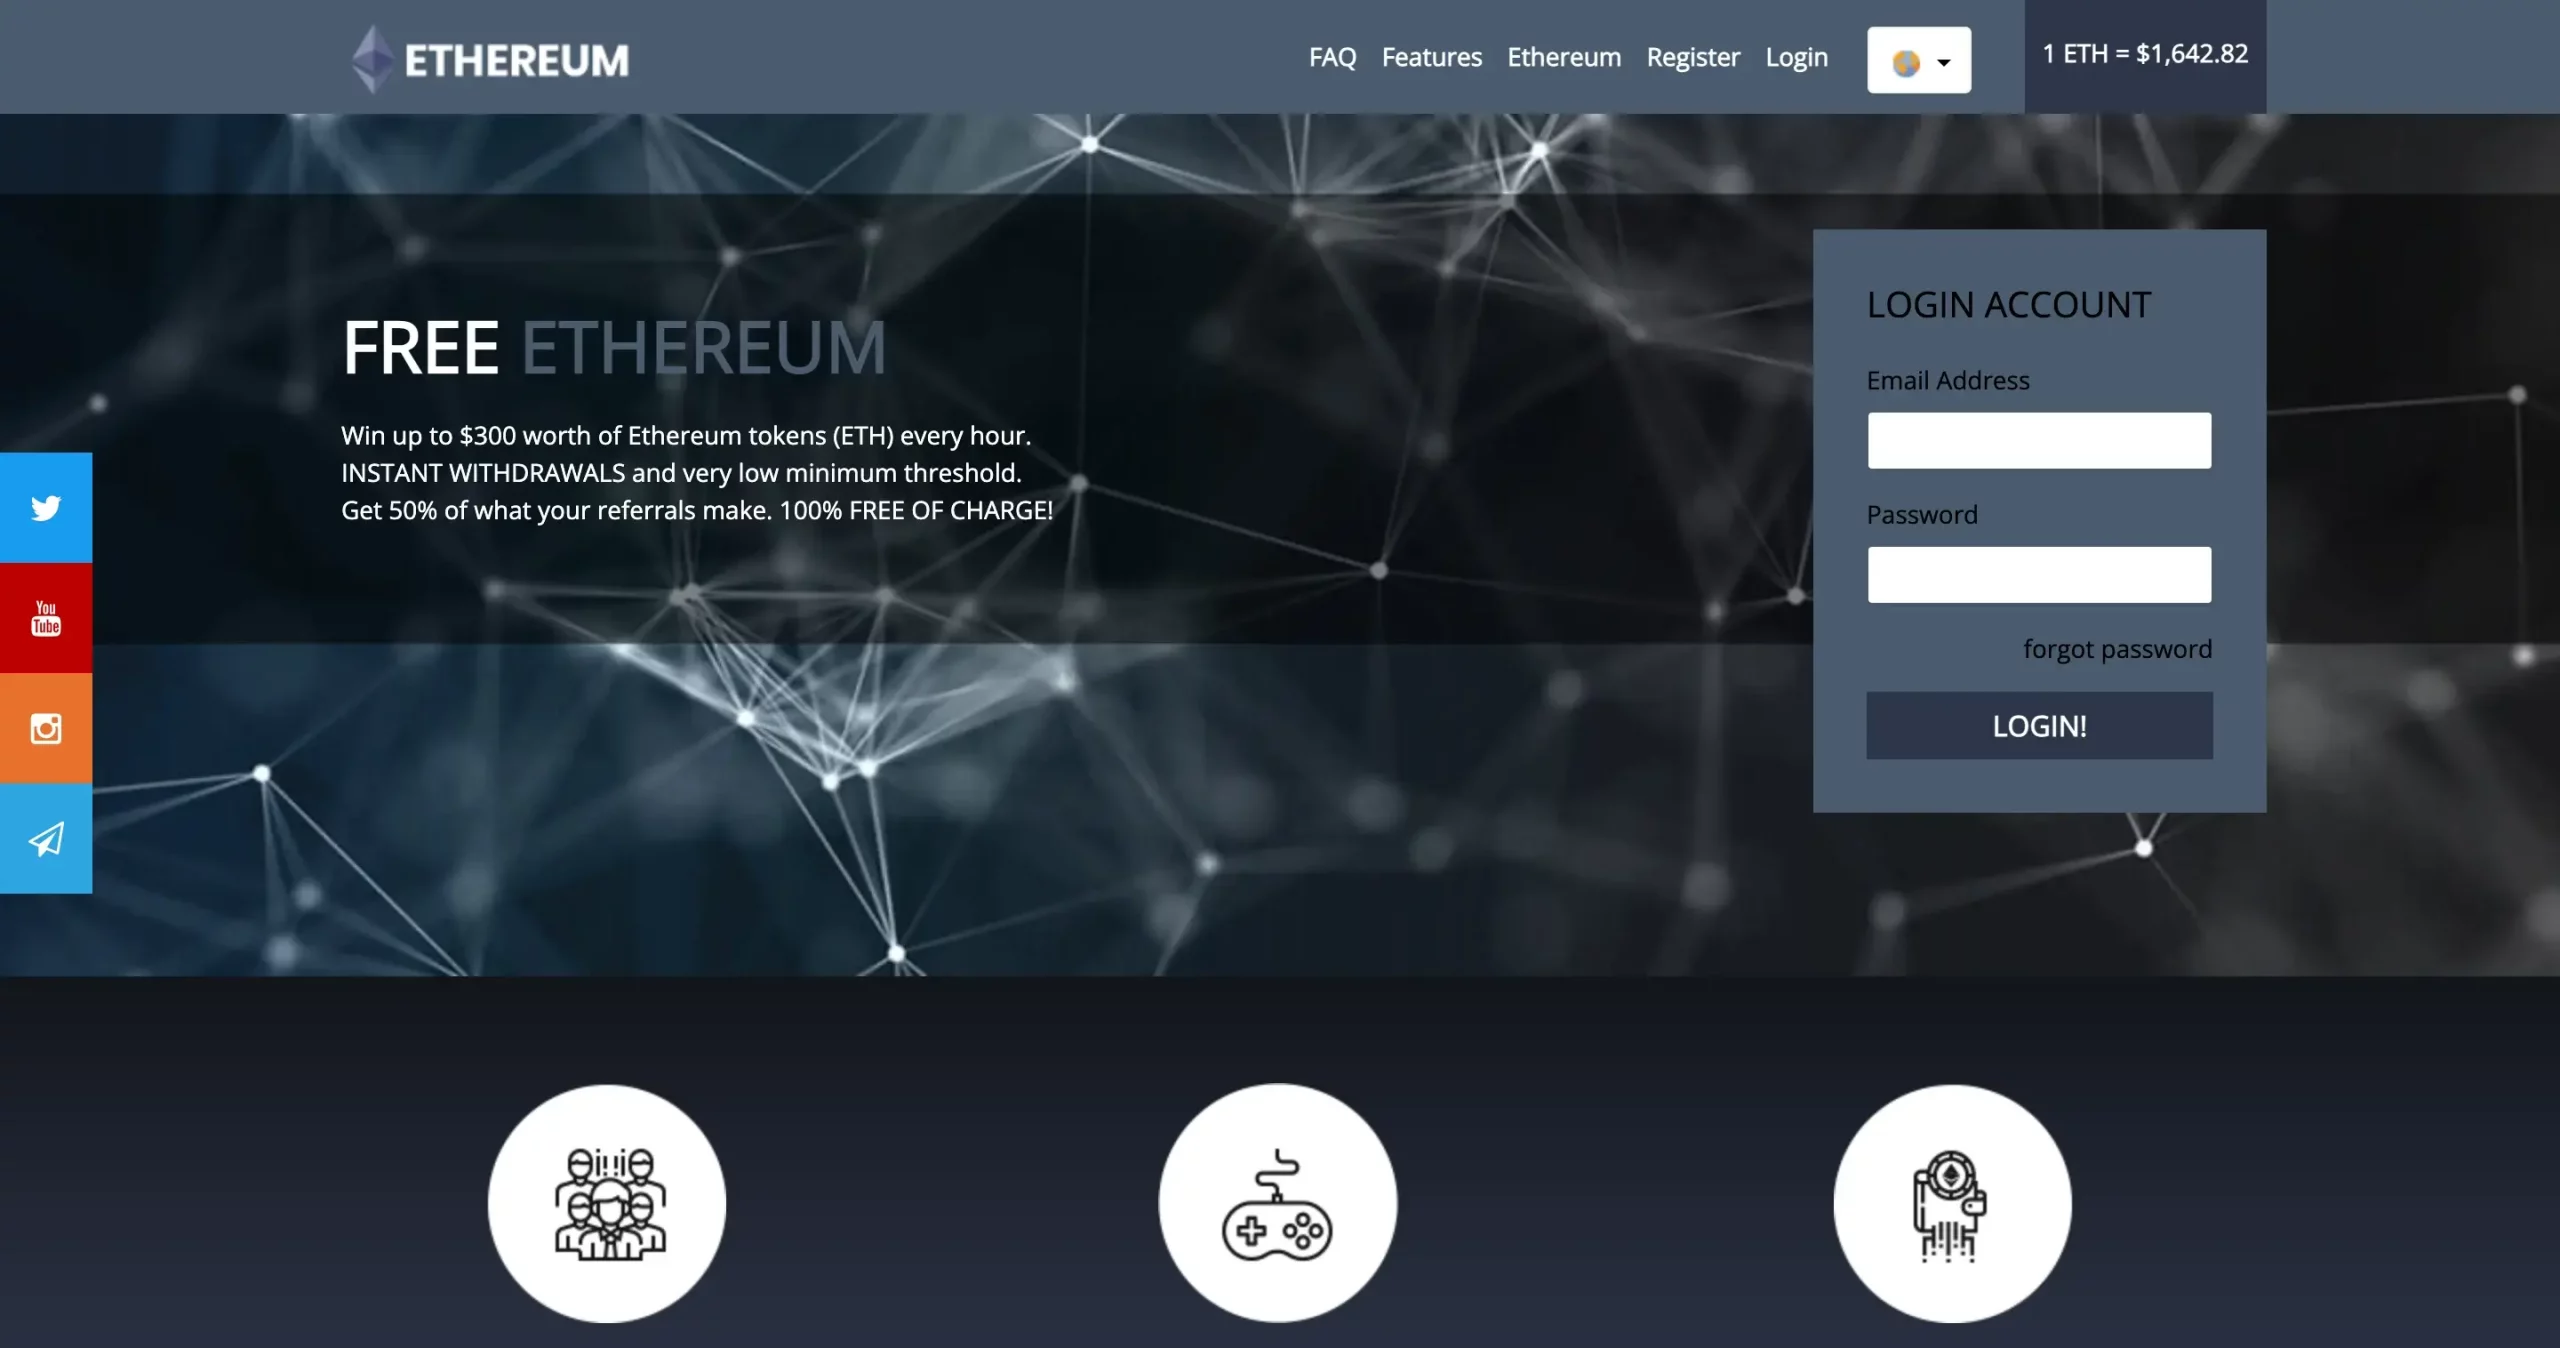 Top Ethereum Faucets - Freeethereum.com